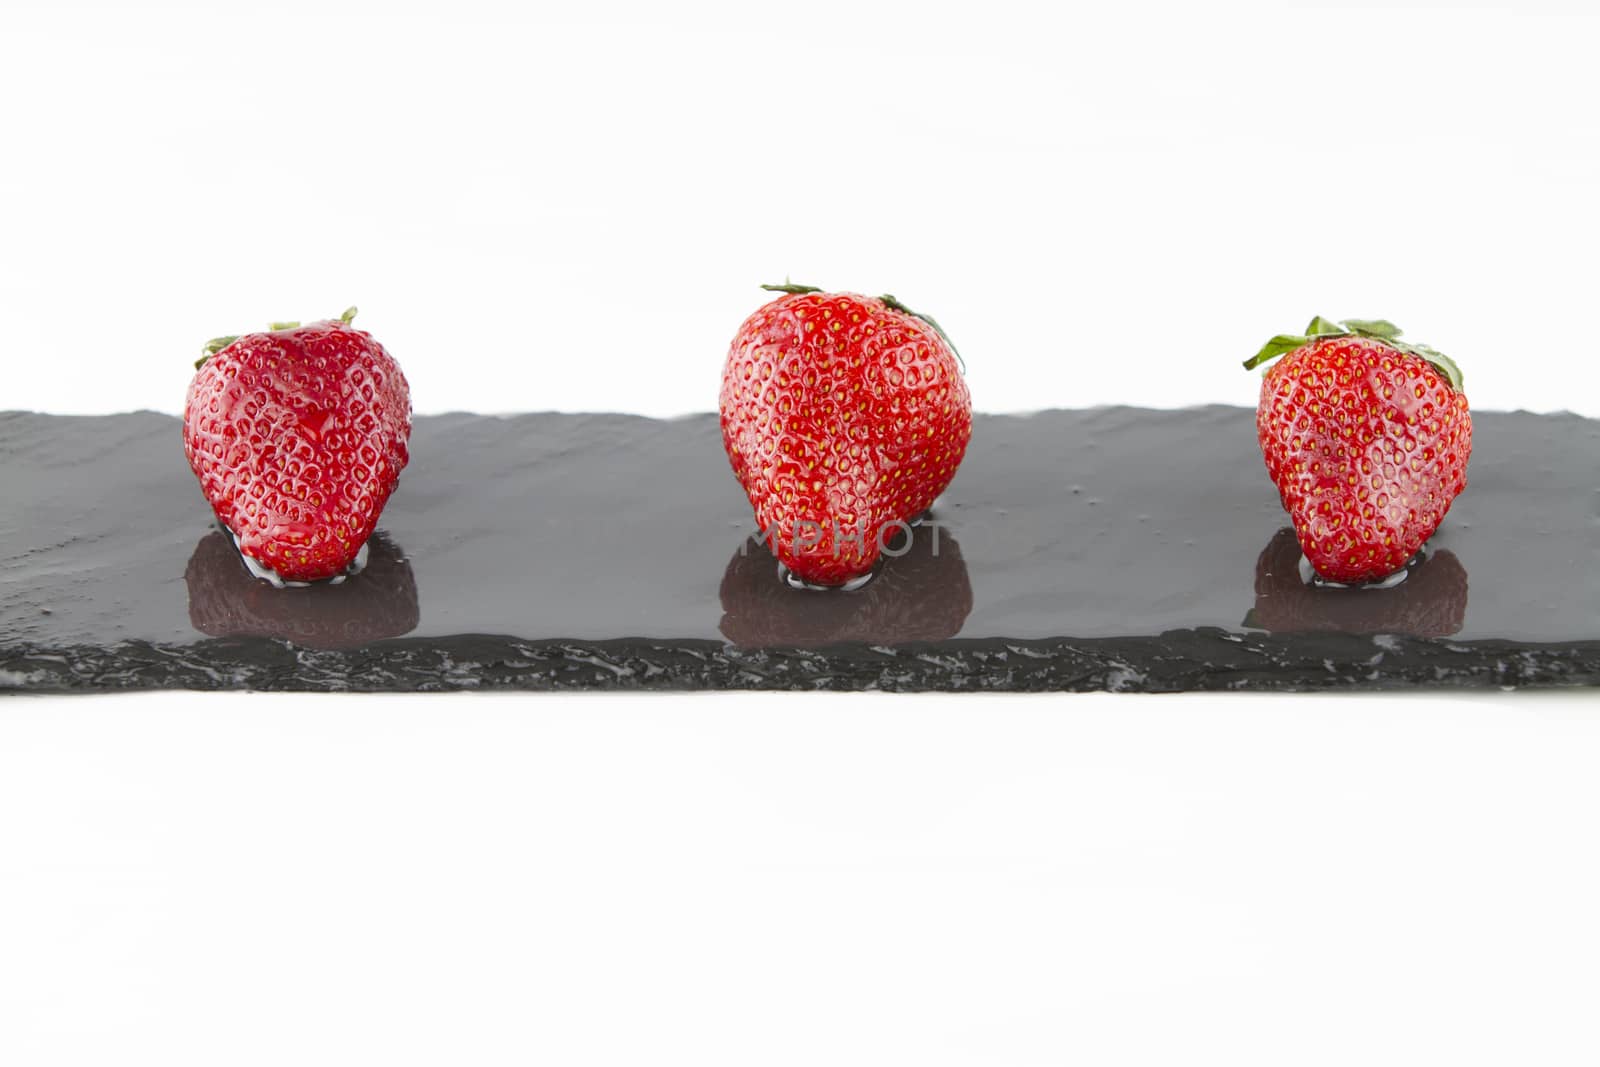 Close-up of three isolated strawberries on a rectangular strip of wet slate on a white background shot in high angle view with selective focus